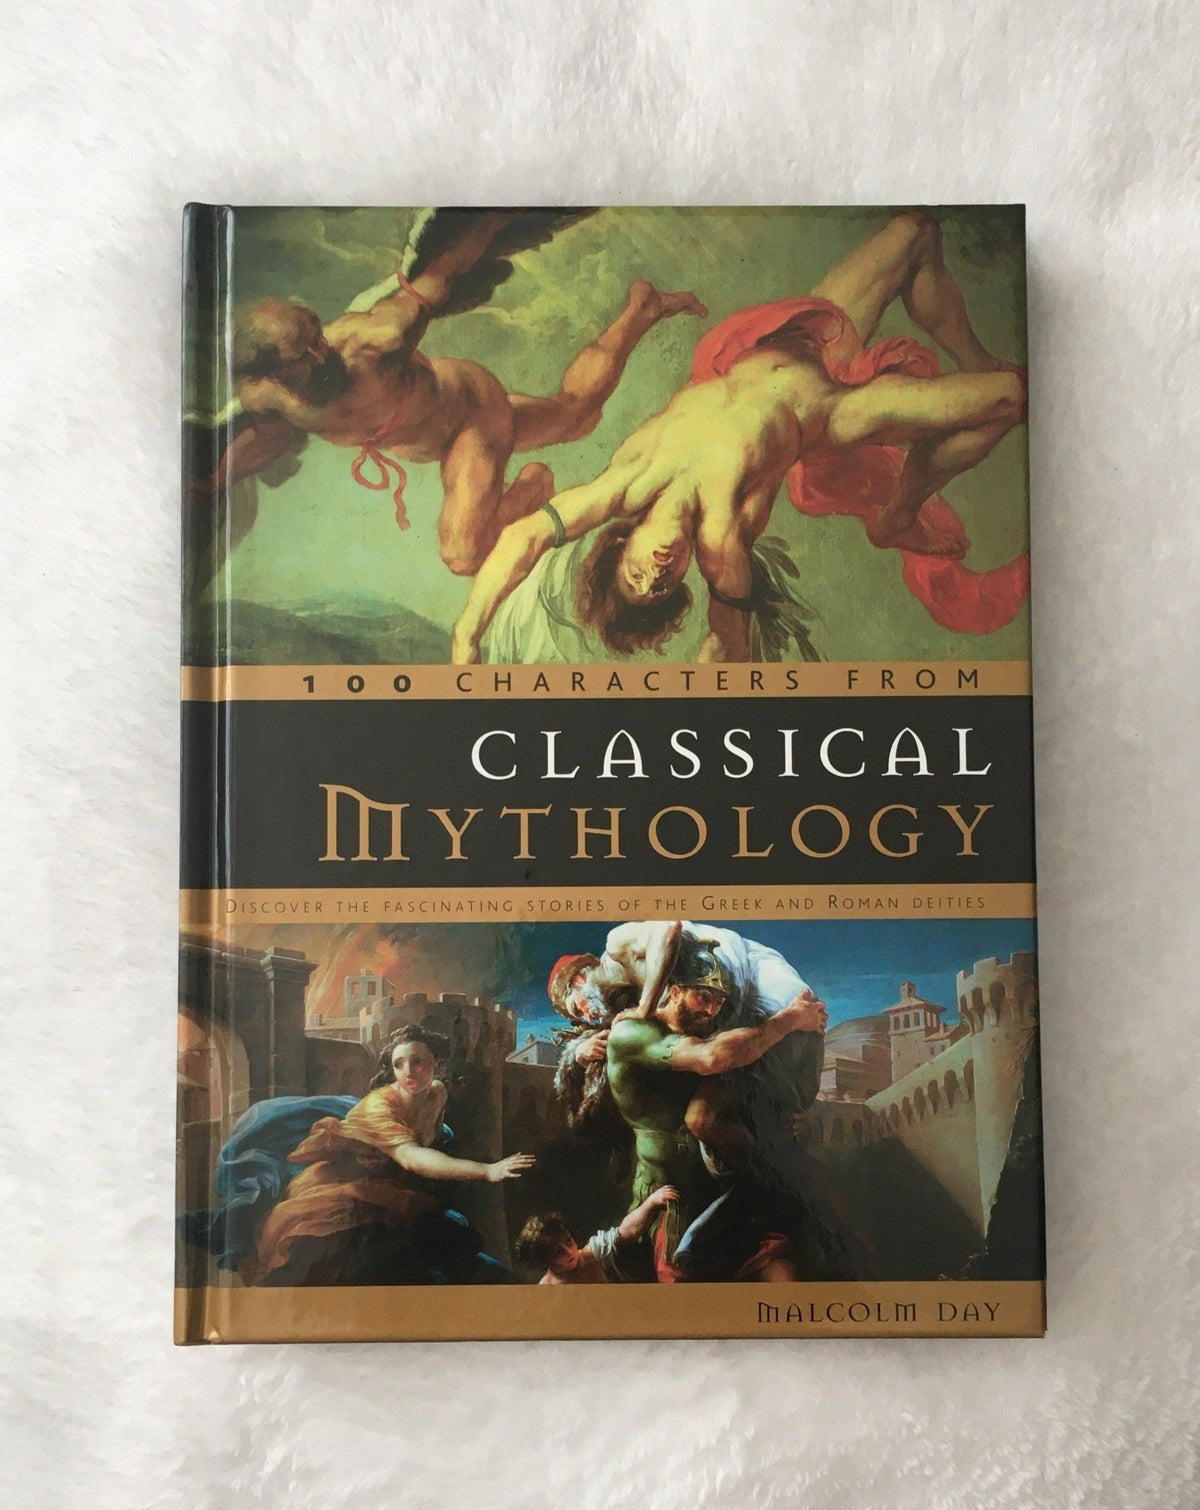 100 Characters from Classical Mythology by Malcolm Day, book, Ten Dollar Books, Ten Dollar Books